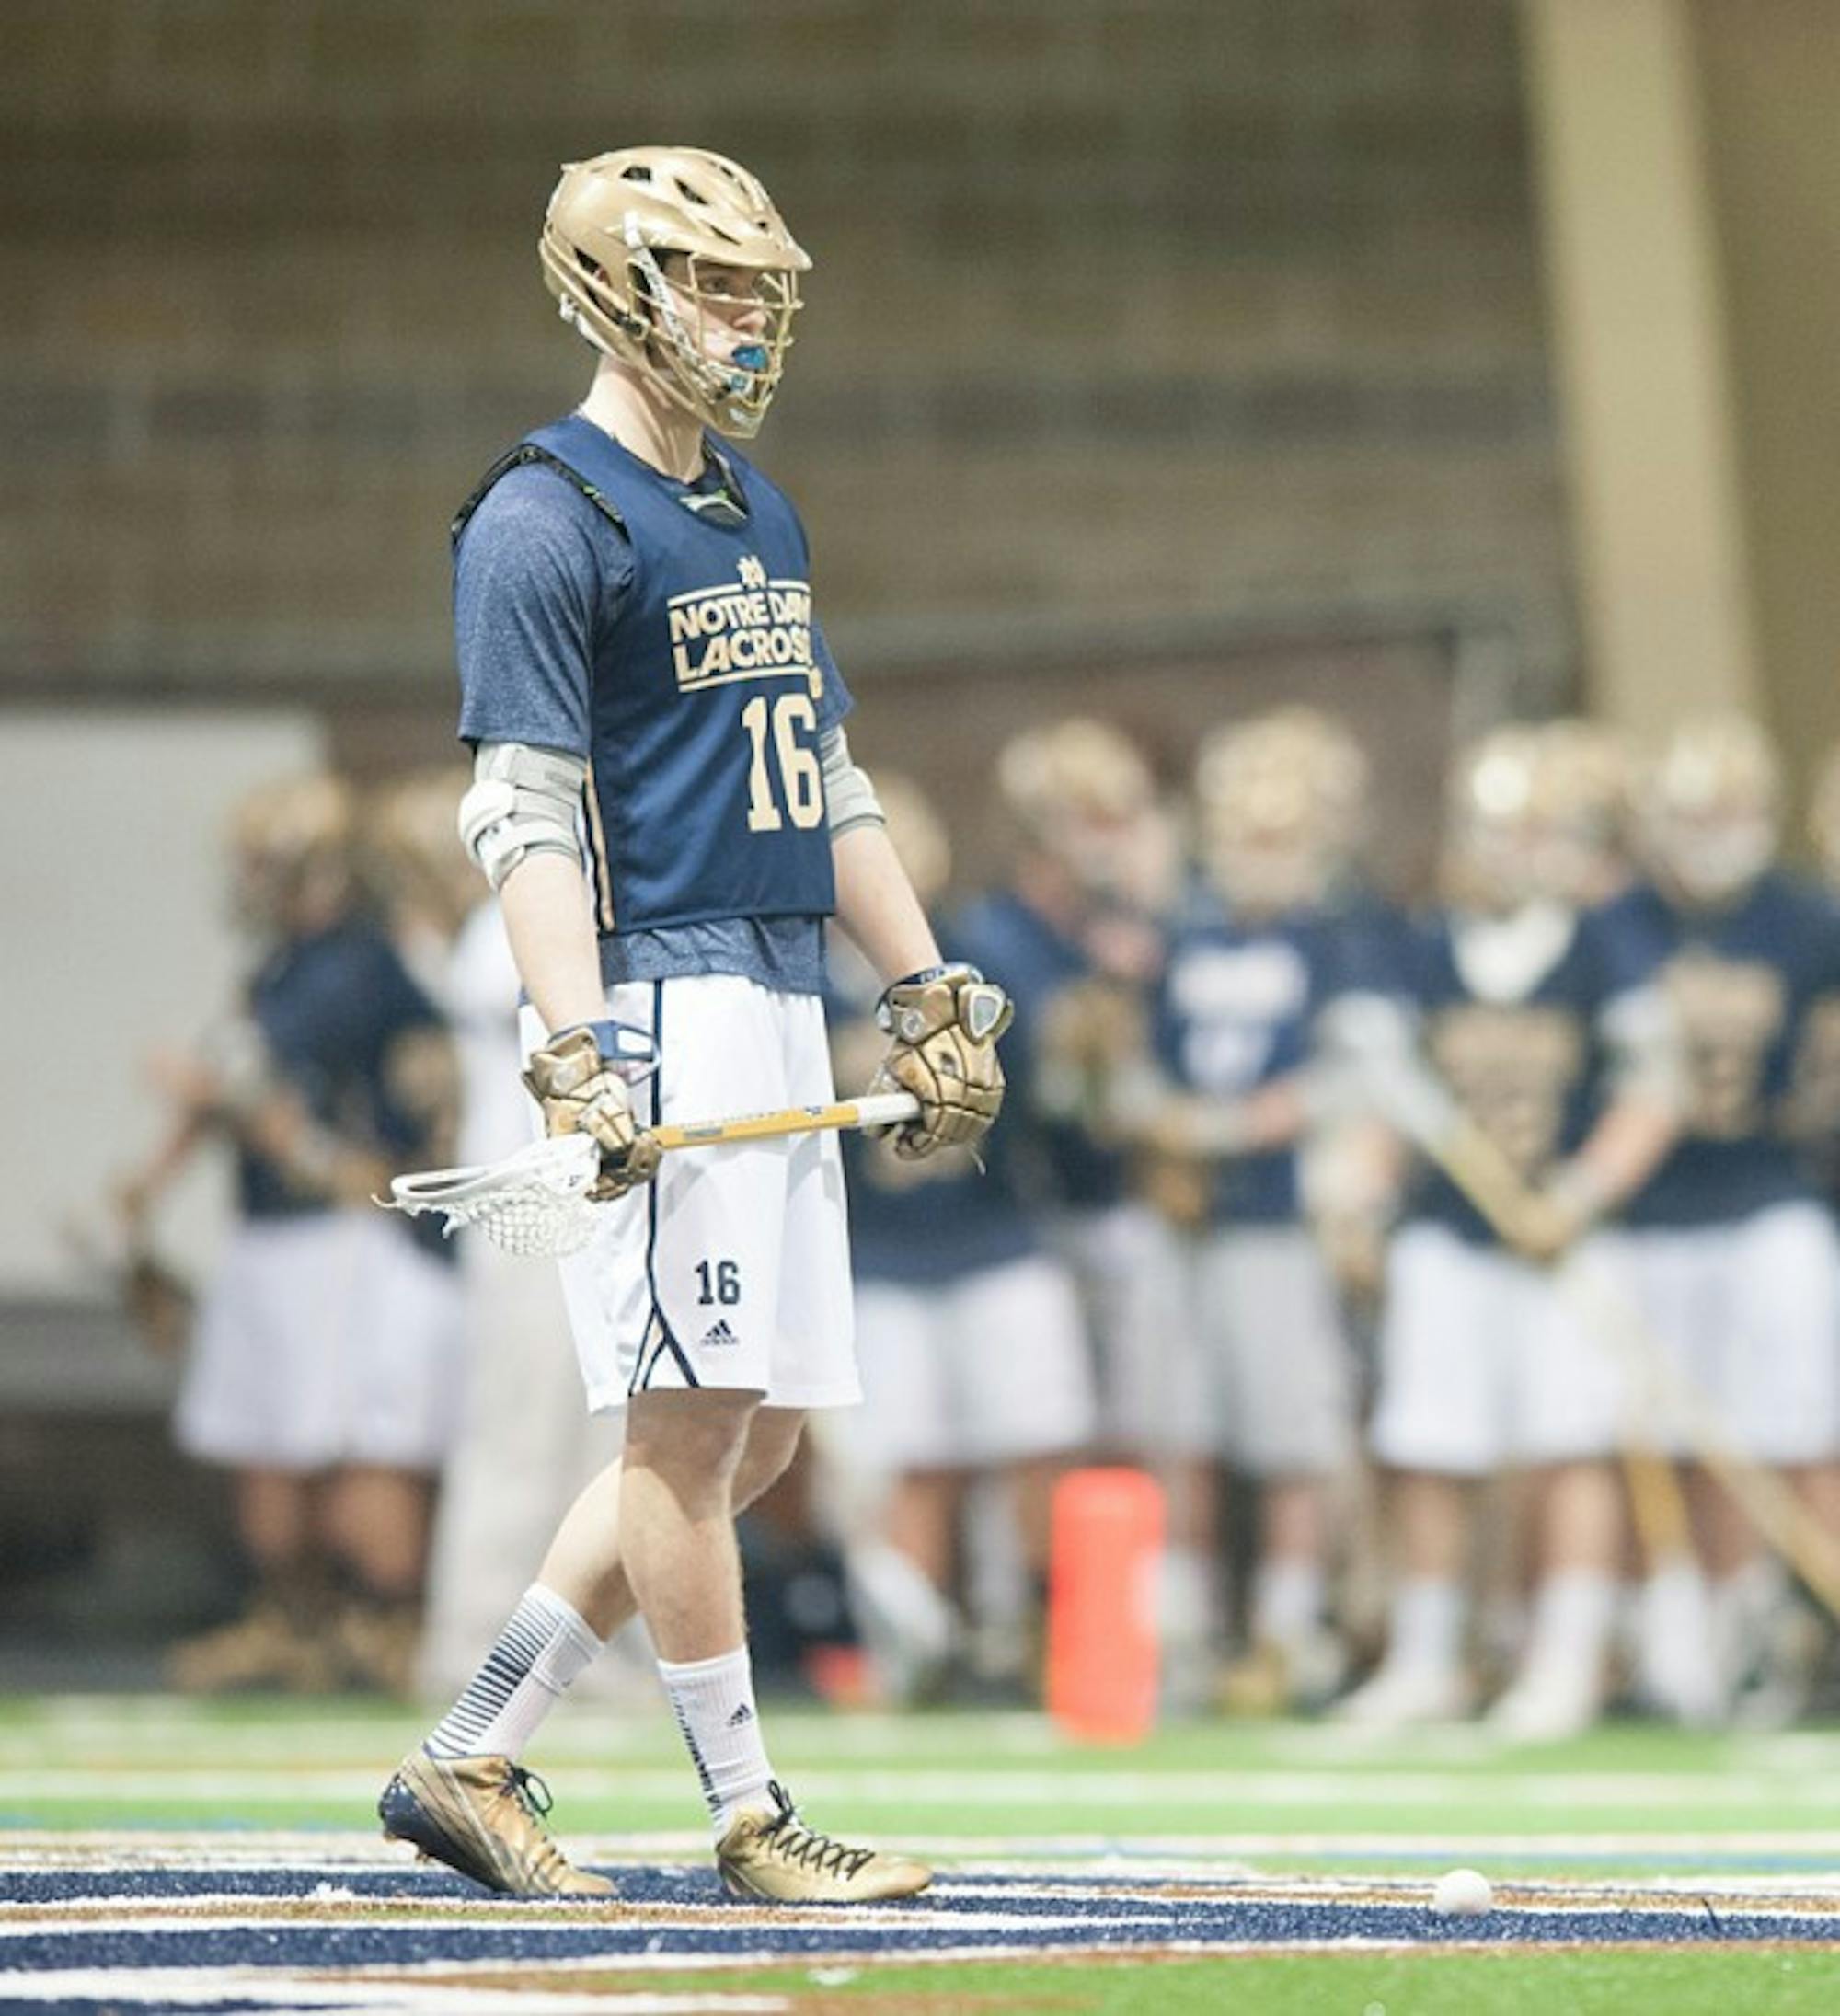 Freshman midfielder Sergio Perkovic watches game action against Detroit on Sunday at the Loftus Center. Perkovic scored three goals against Bellarmine in a contest the day before, a 12-5 Notre Dame win.